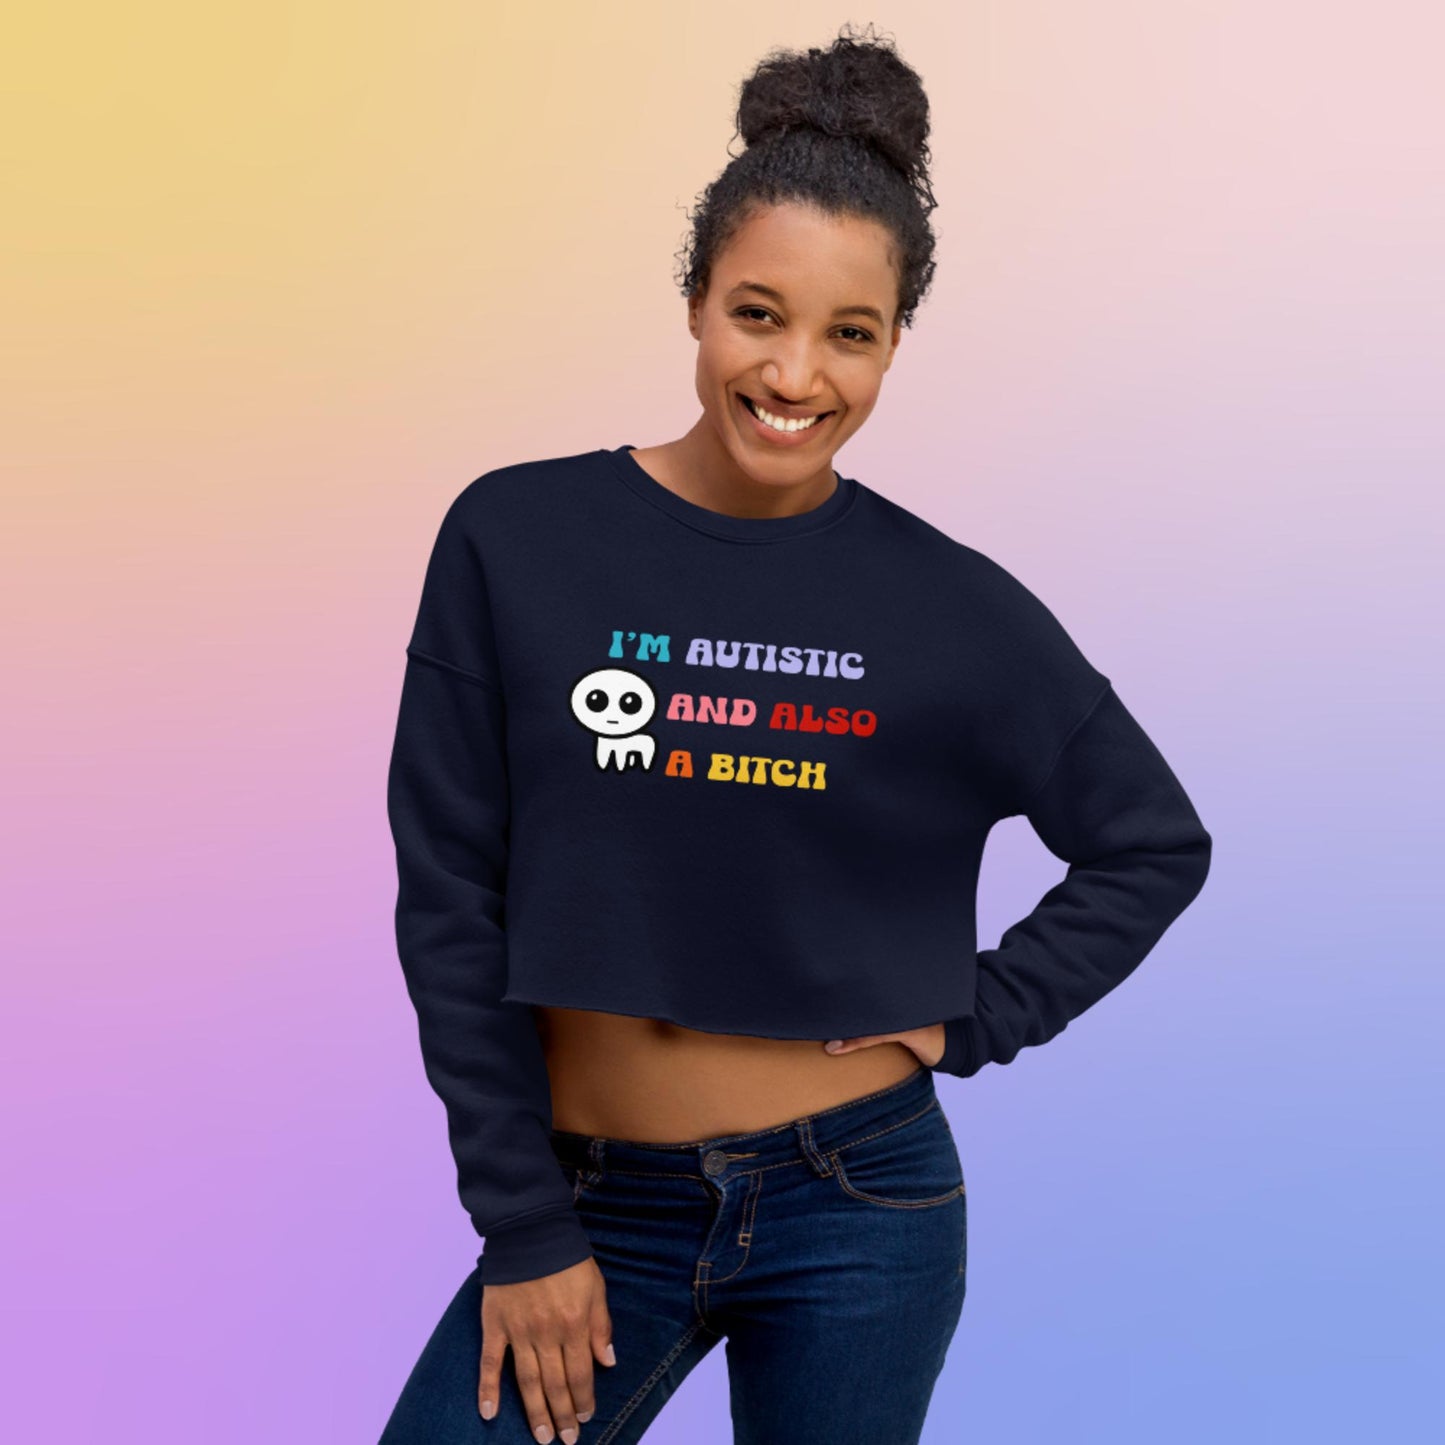 I'm autistic and also a bitch - Cropped Sweatshirt